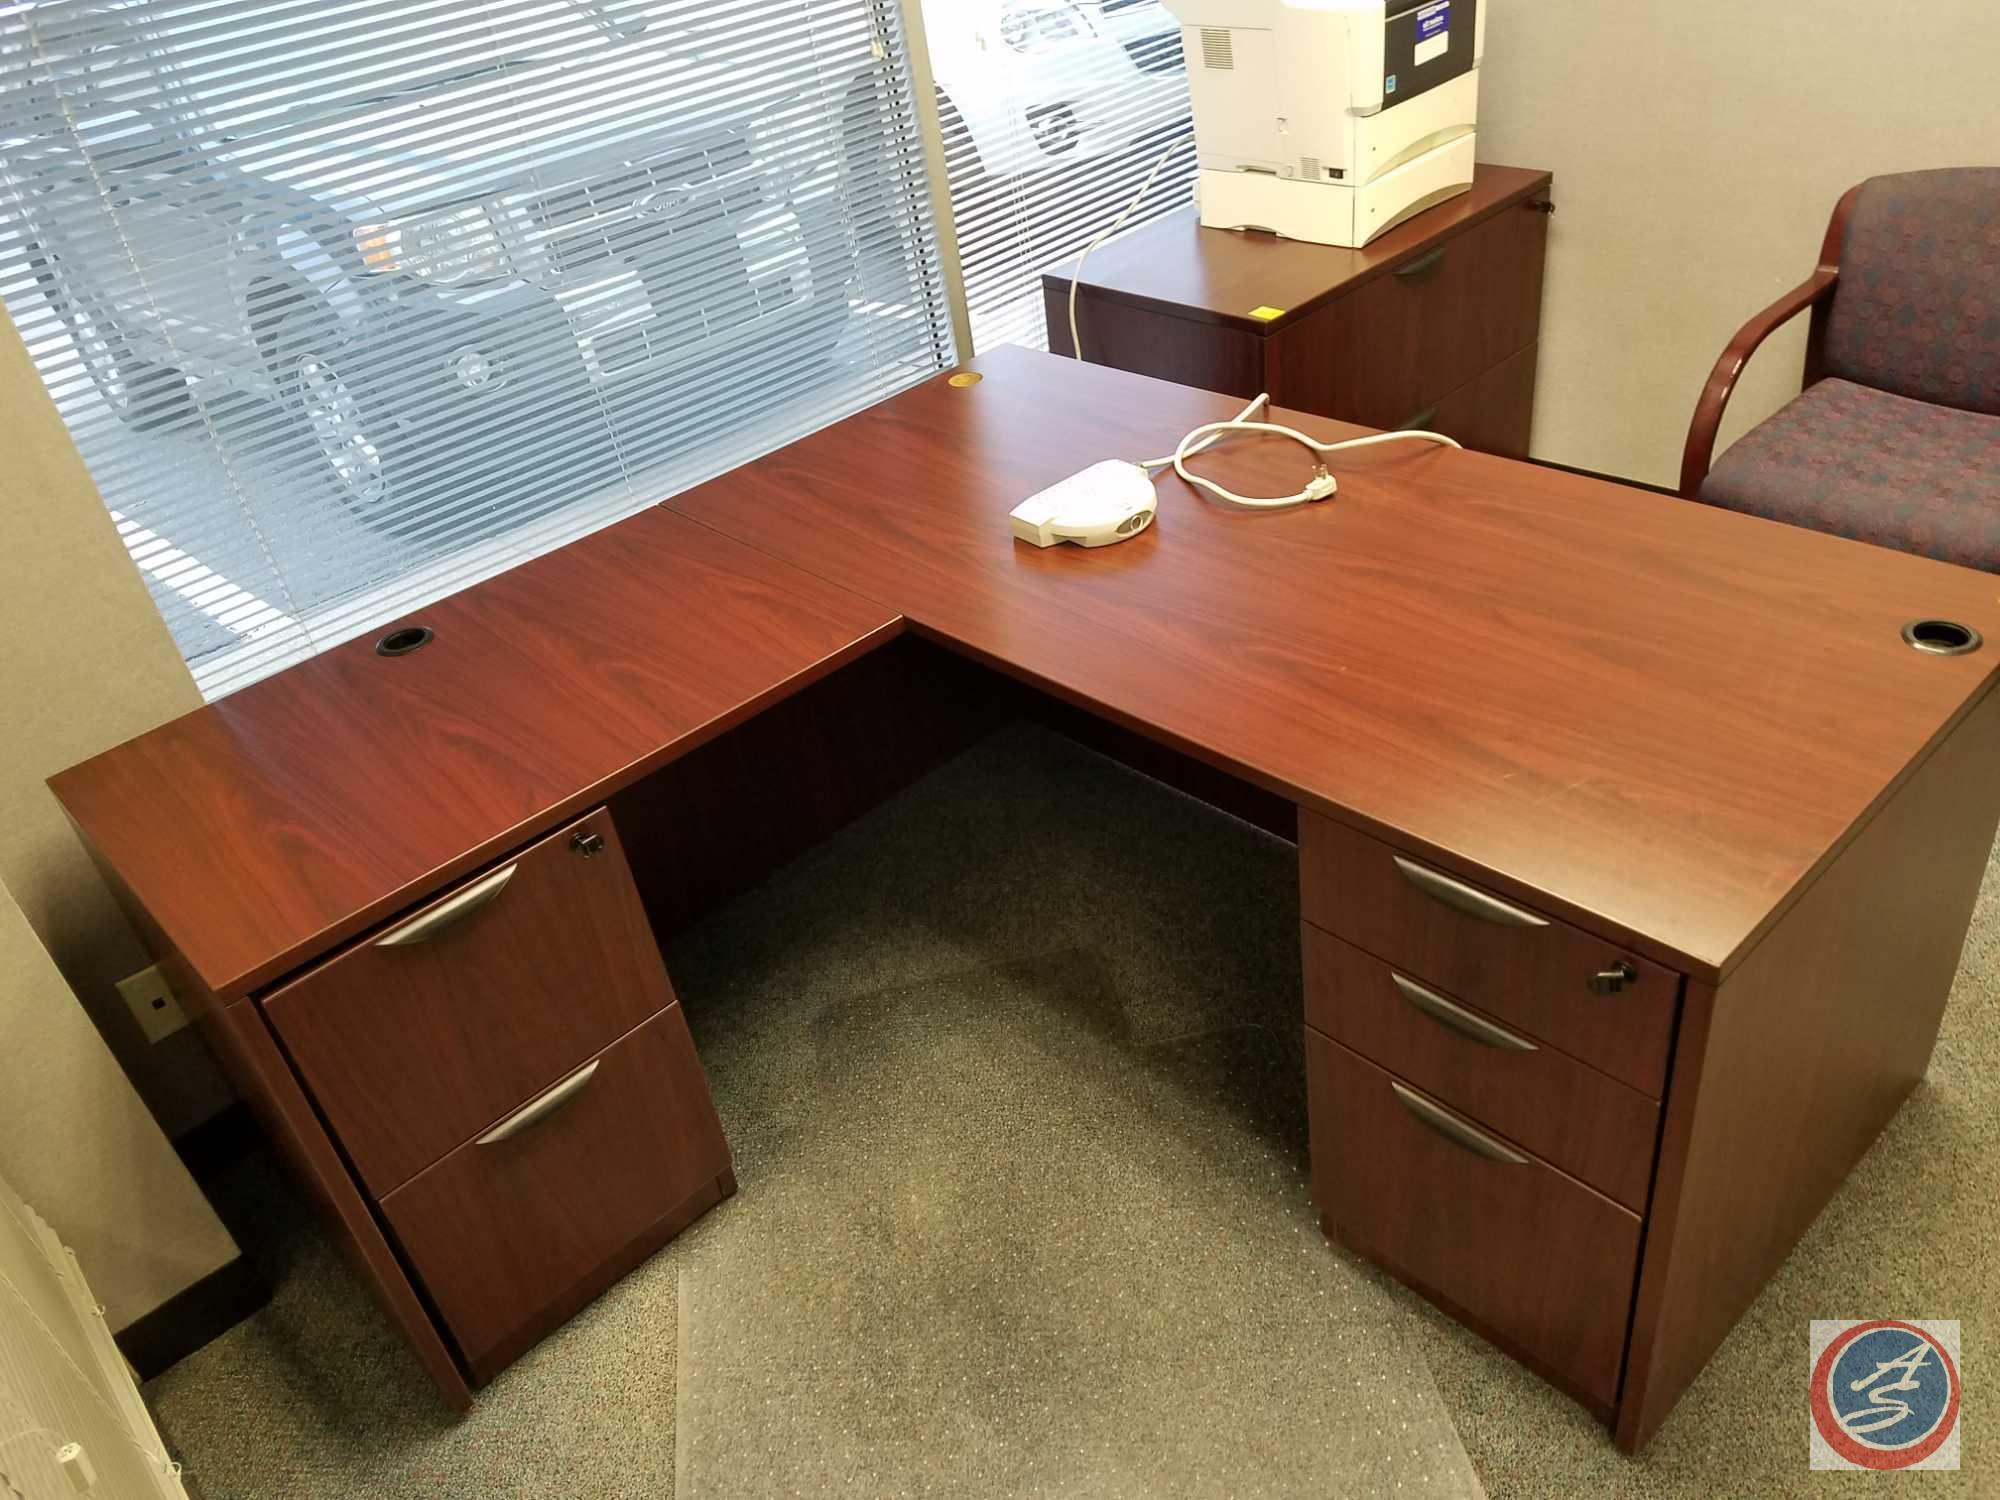 Steelcase L-Shaped Wood Desk w/3 Drawers and 2 Drawer File Cabinet w/key Measuring: 66"x 65"x29.5",